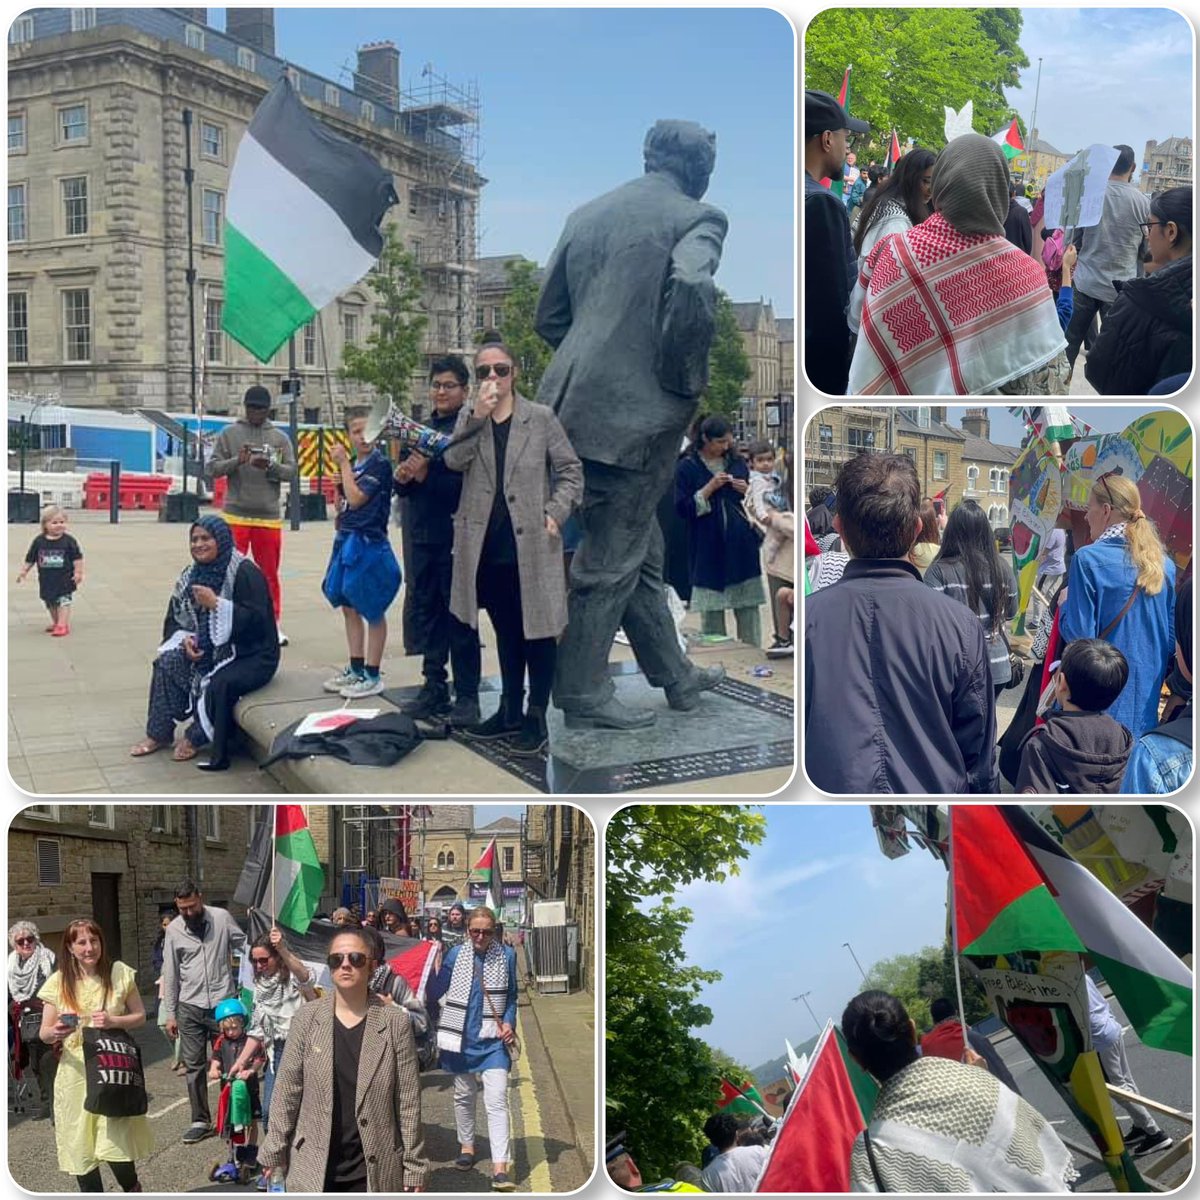 I will lose followers for this post but I’m ok with it. Today I attended, marched & spoke at the Huddersfield rally for Palestine. We must call for a permanent ceasefire. #palestine